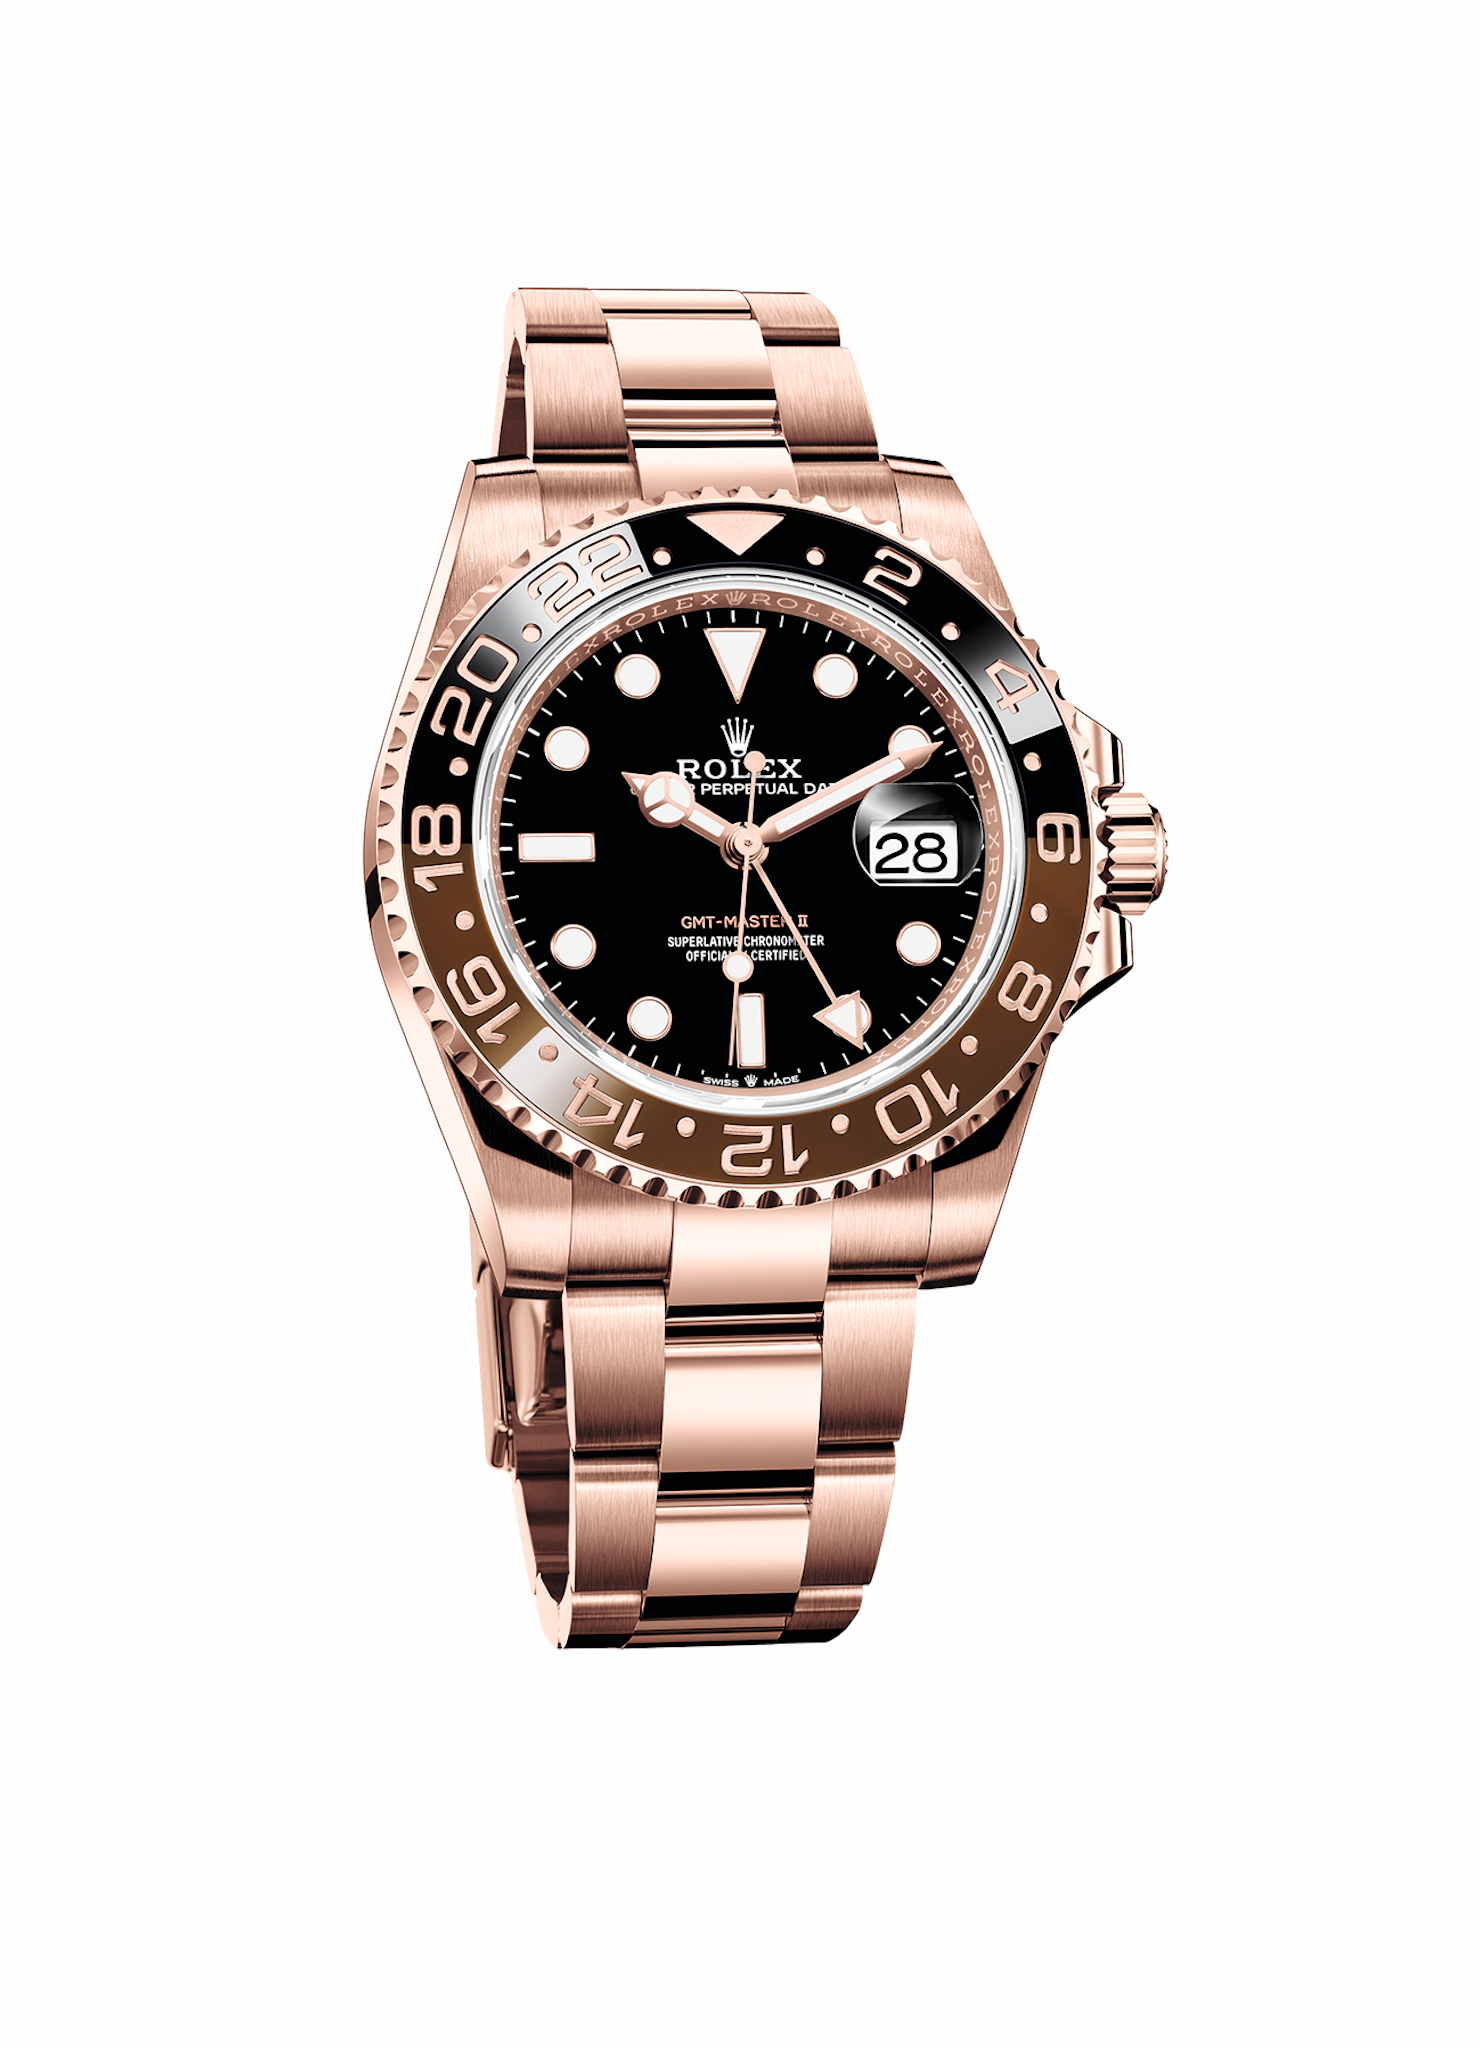 ROLEX OYSTER PERPETUAL GMTMASTER II